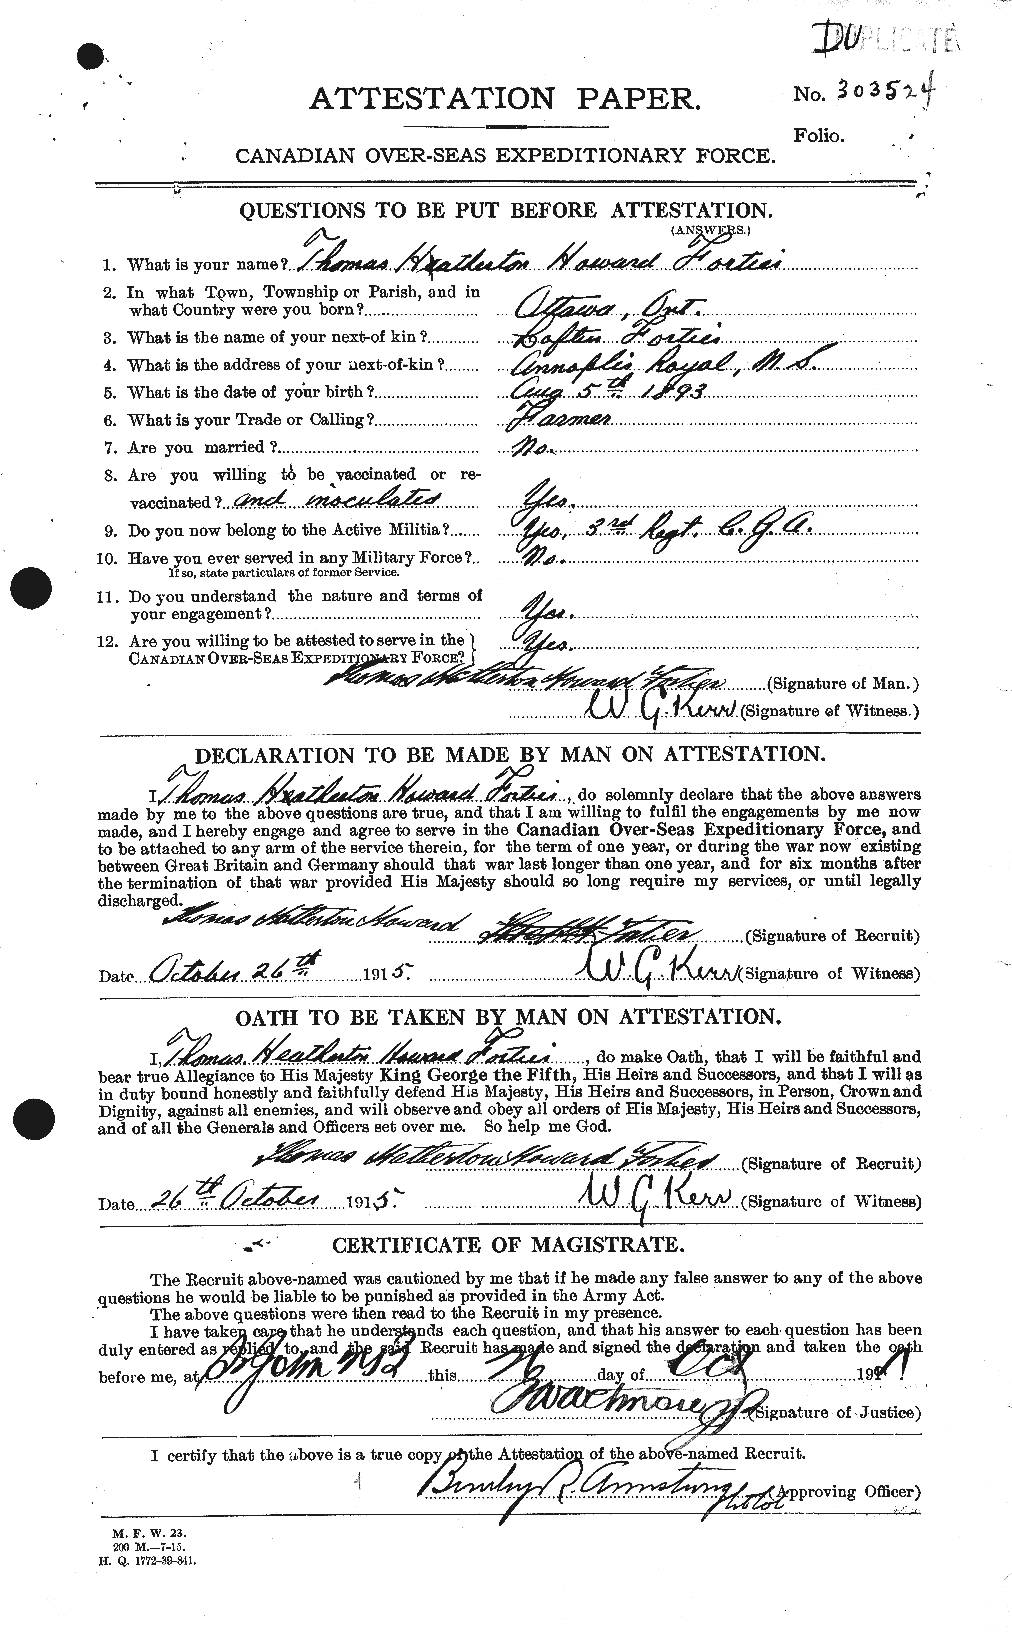 Personnel Records of the First World War - CEF 333622a